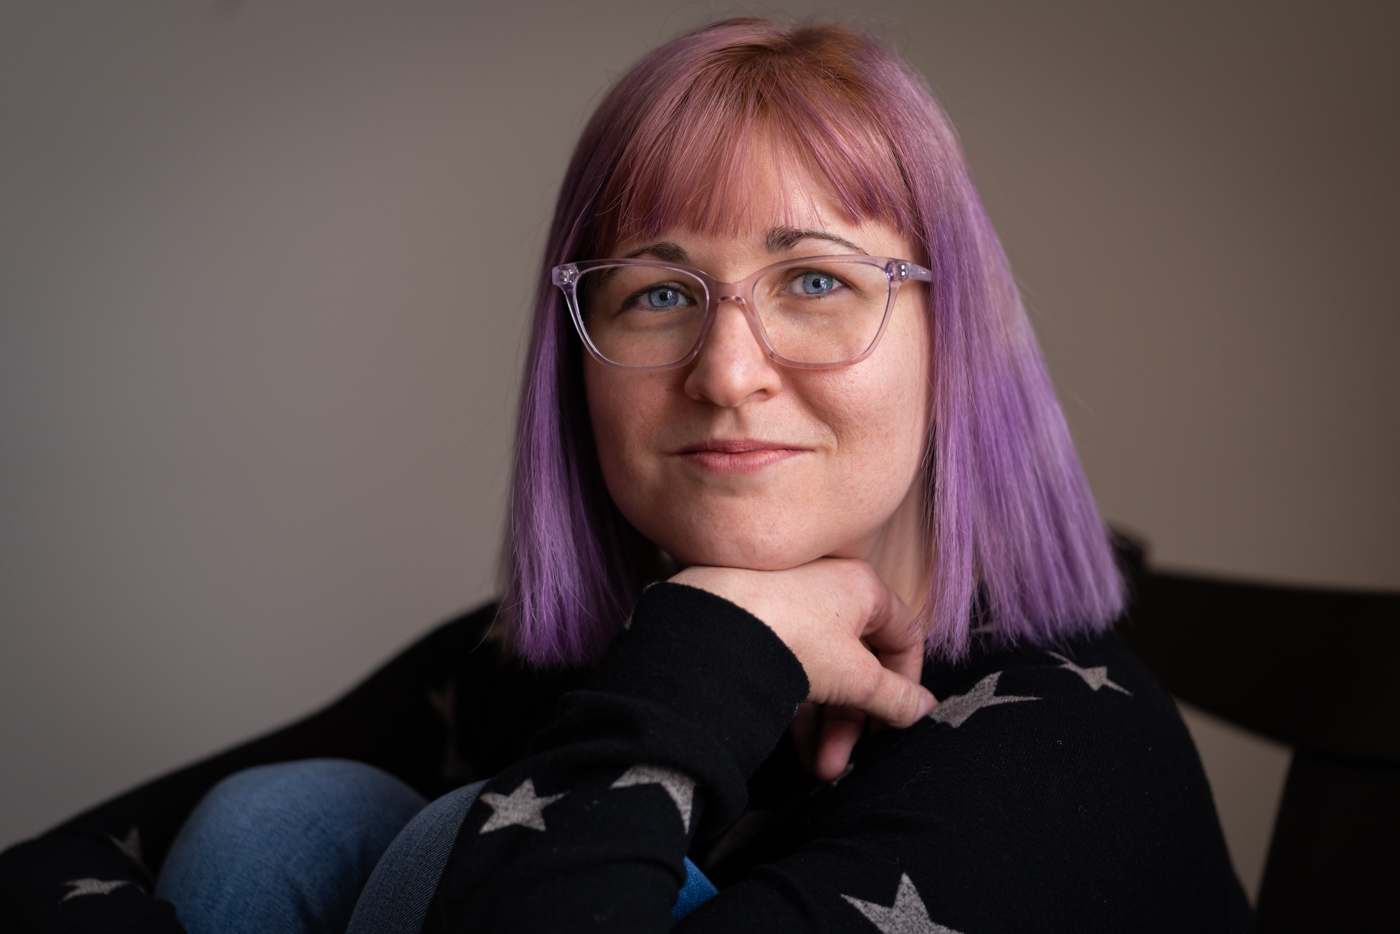 Photo of a woman in glasses with purple hair sitting with her chin resting on her hand.